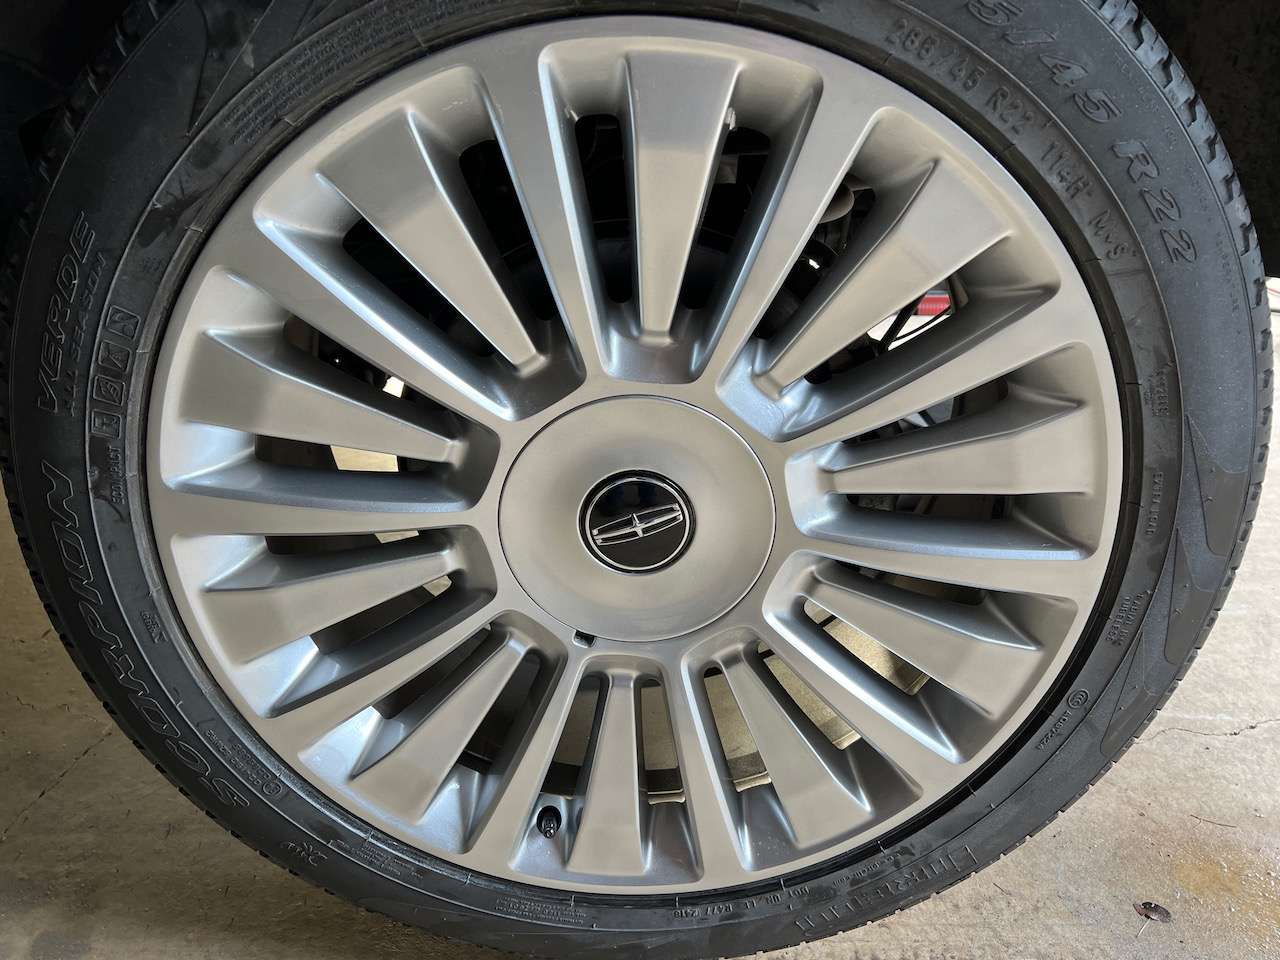 2015 Lincoln Navigator wheel restored and painted.